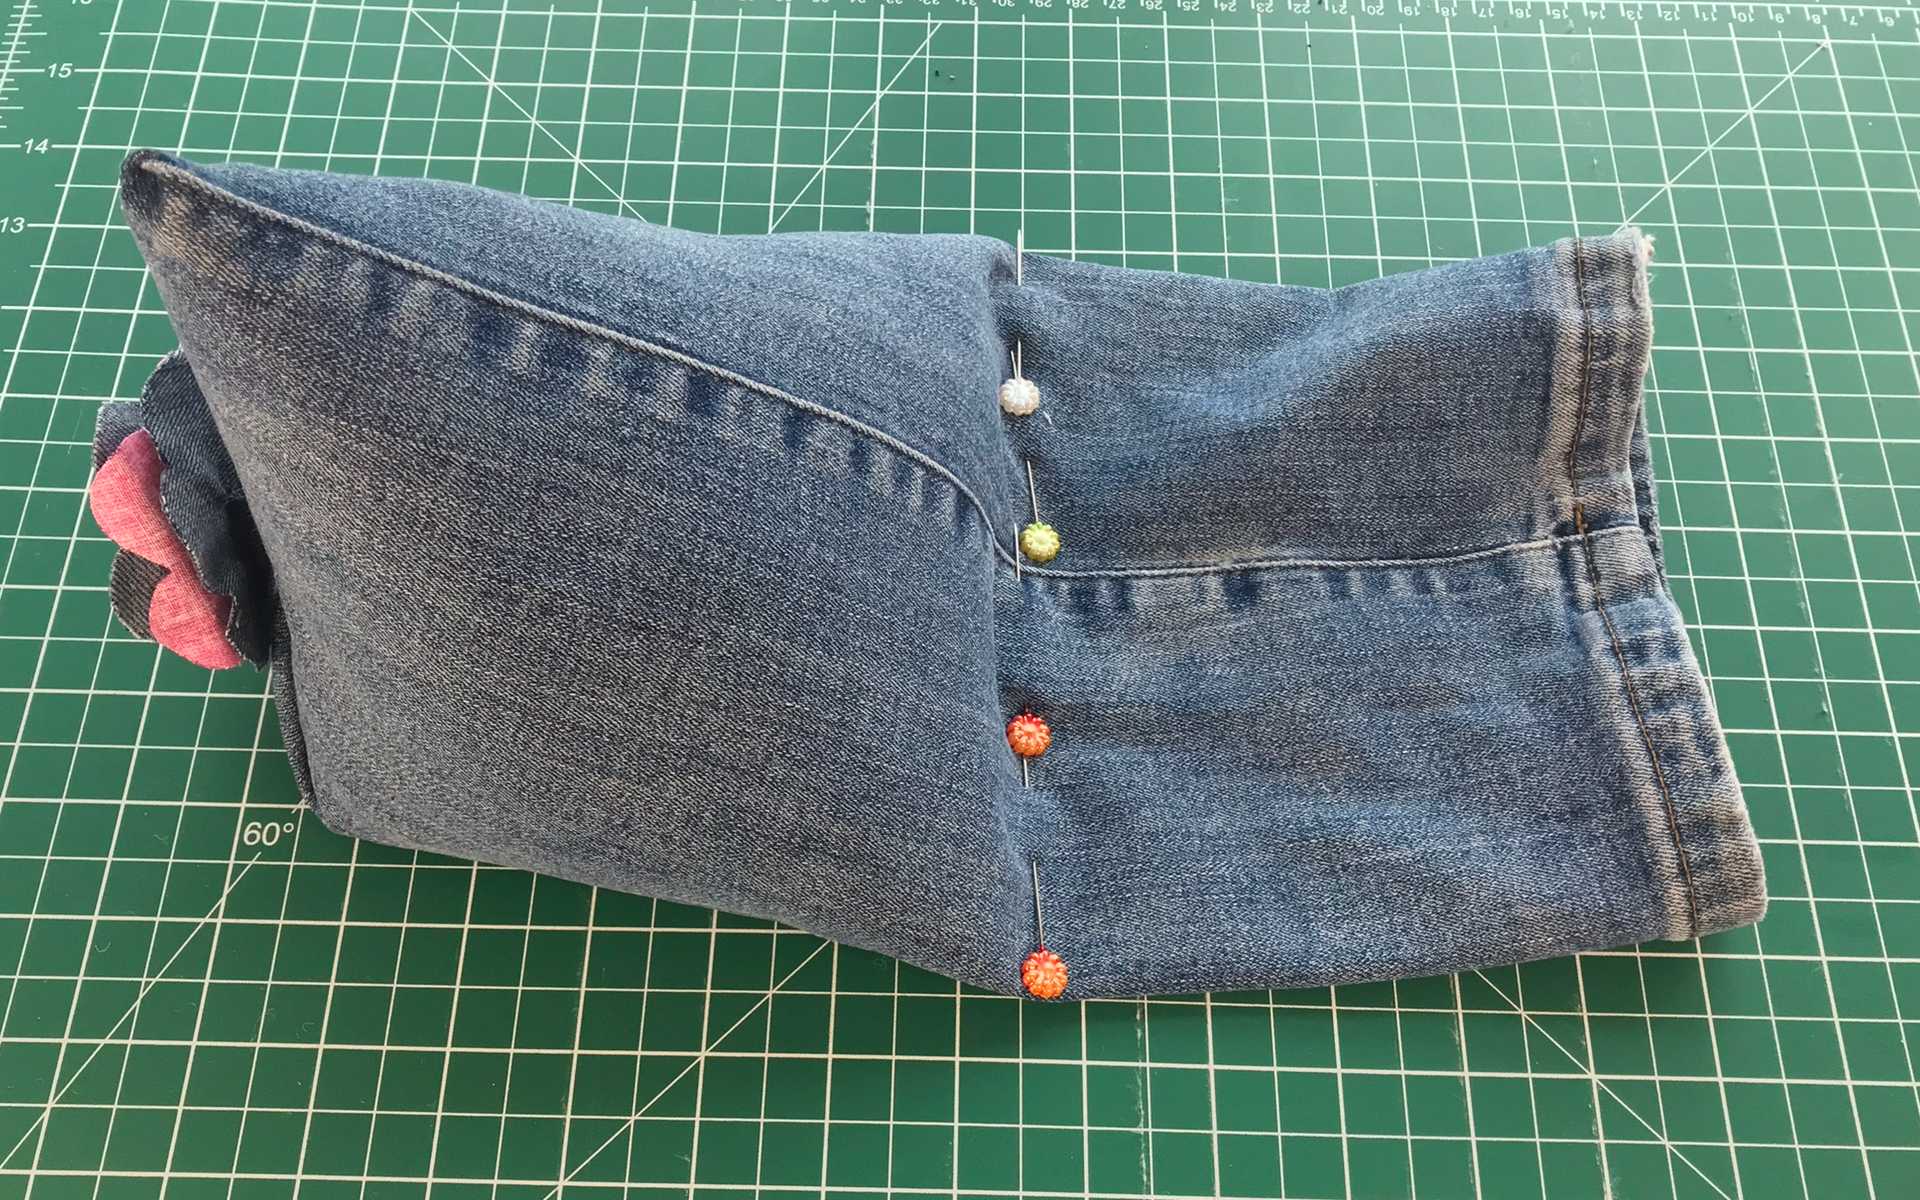 Sew a Phone / Tablet Stand from Old Jeans